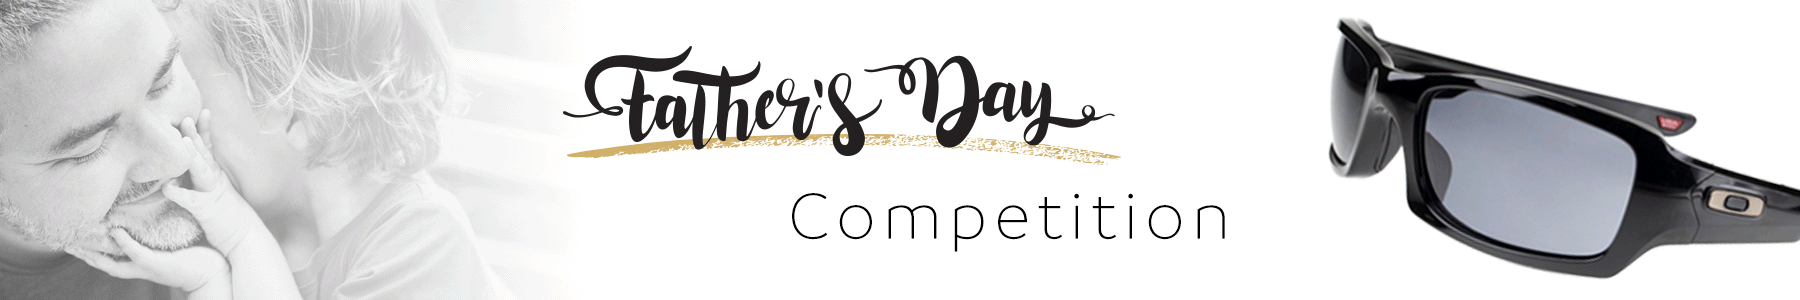 FATHERS DAY COMPETITION